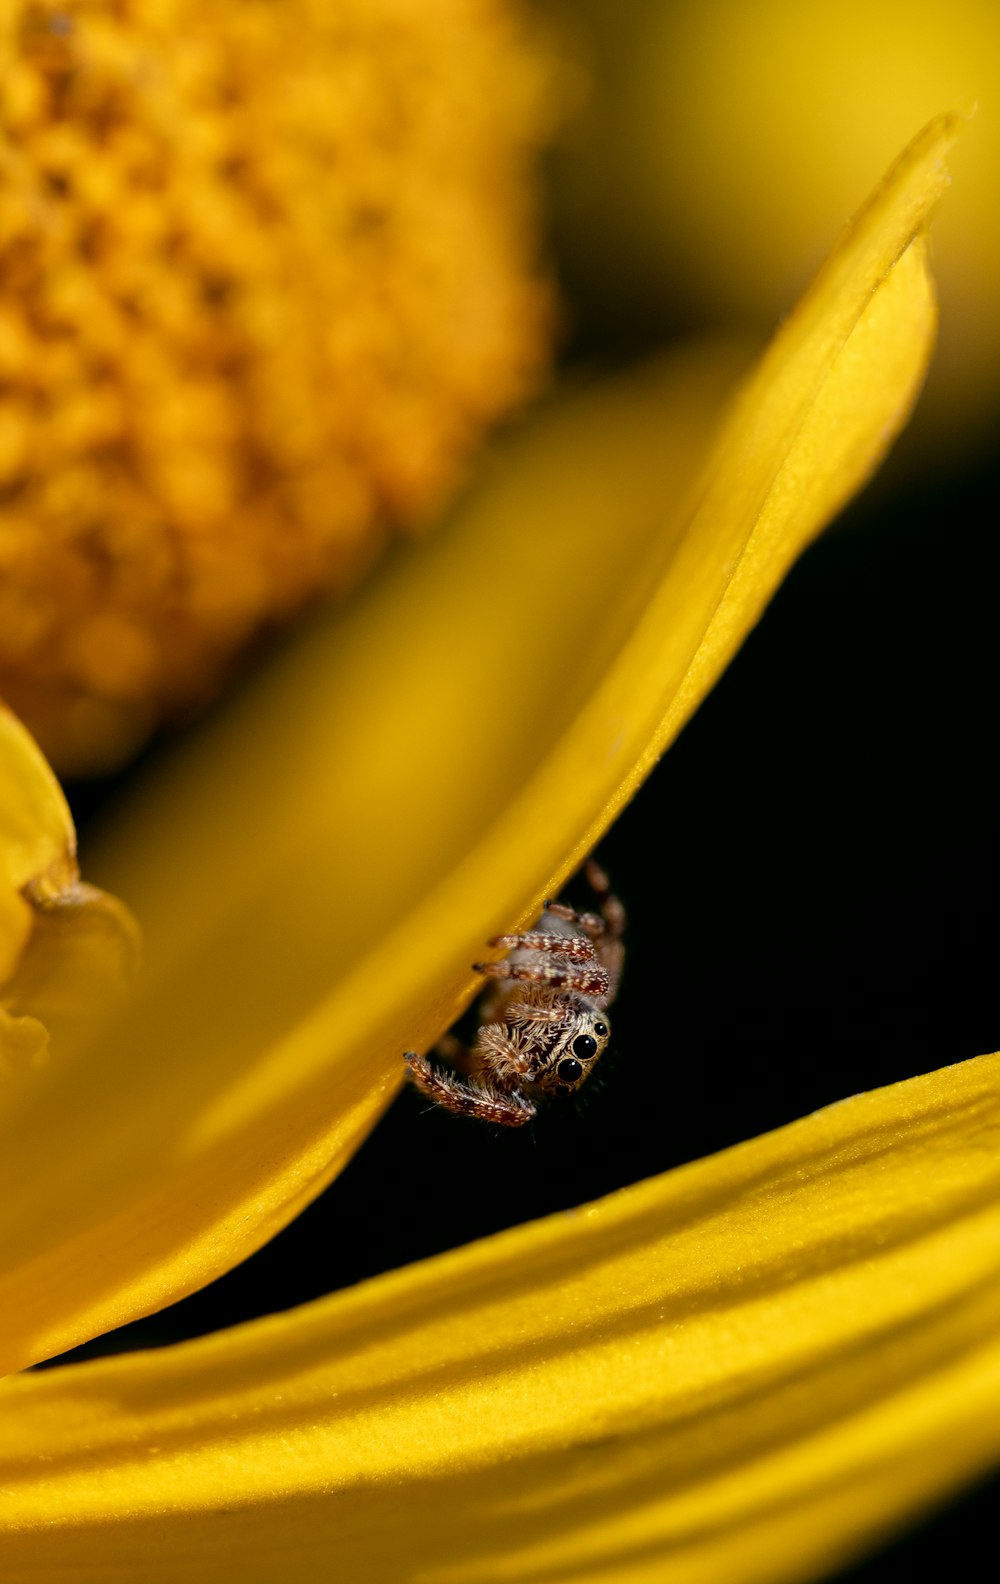 a frog on a yellow flower